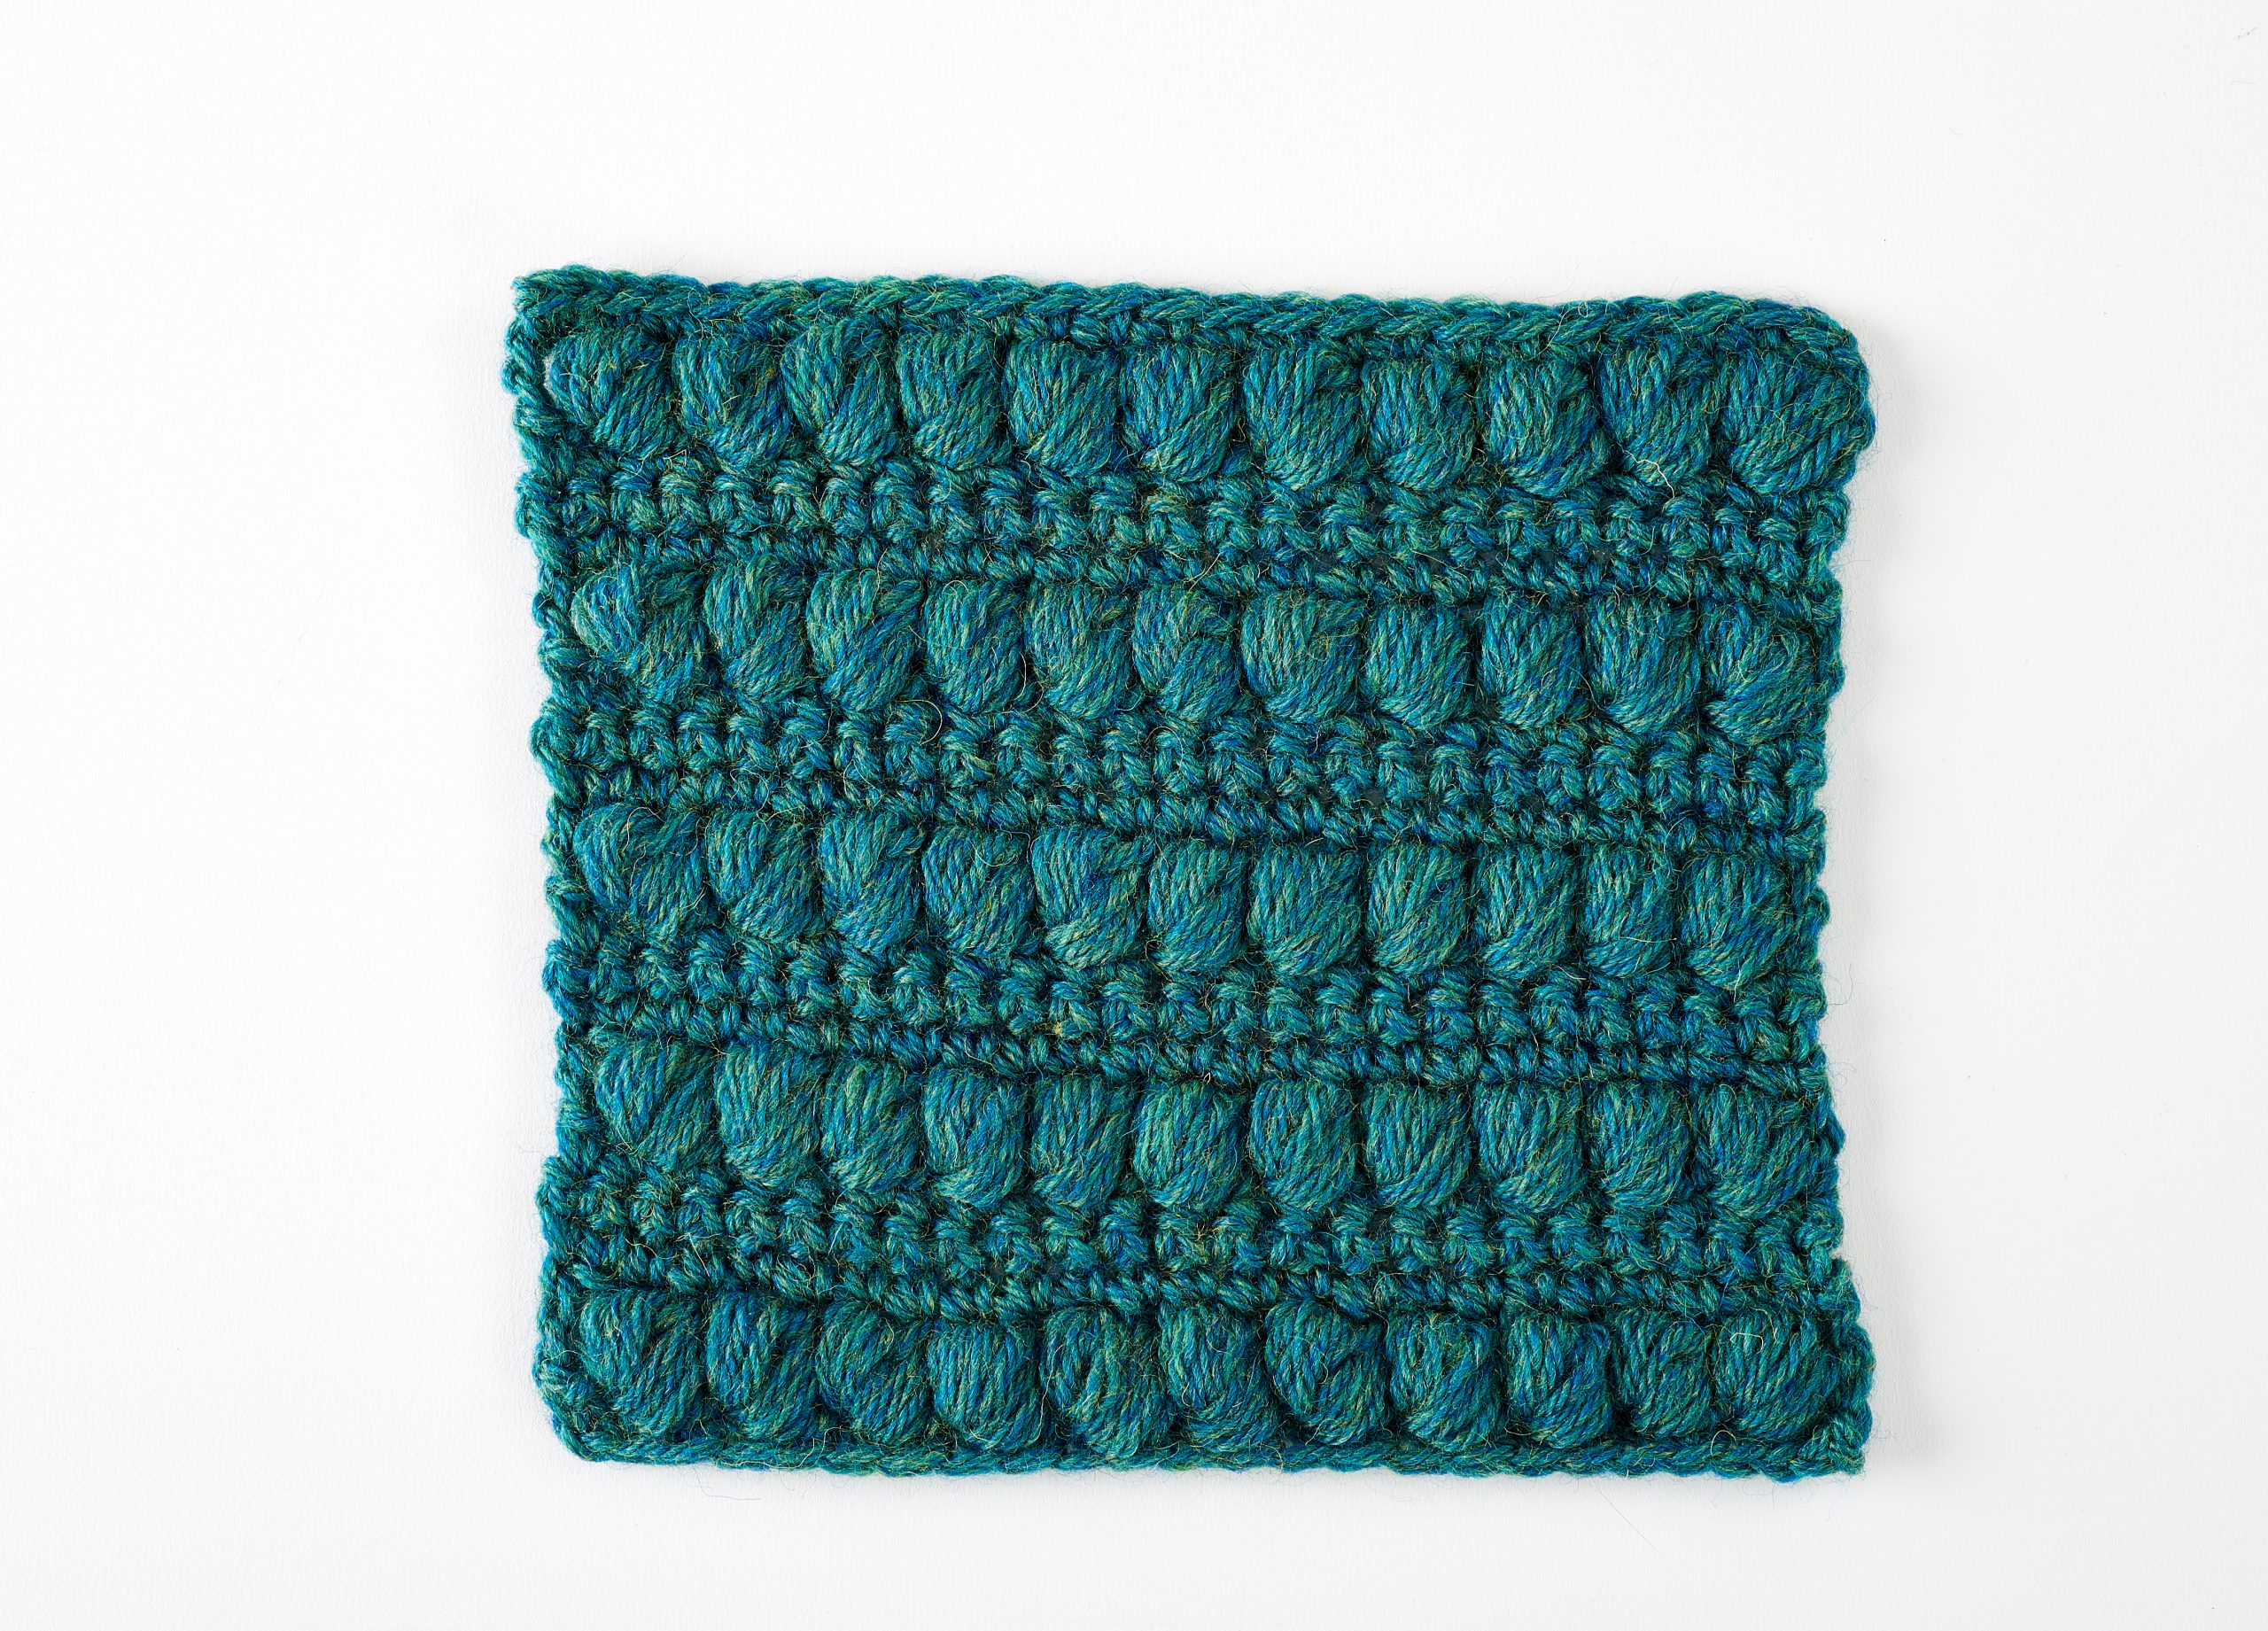 The Best Crochet Stitches for Chunky Yarn | Craftsy